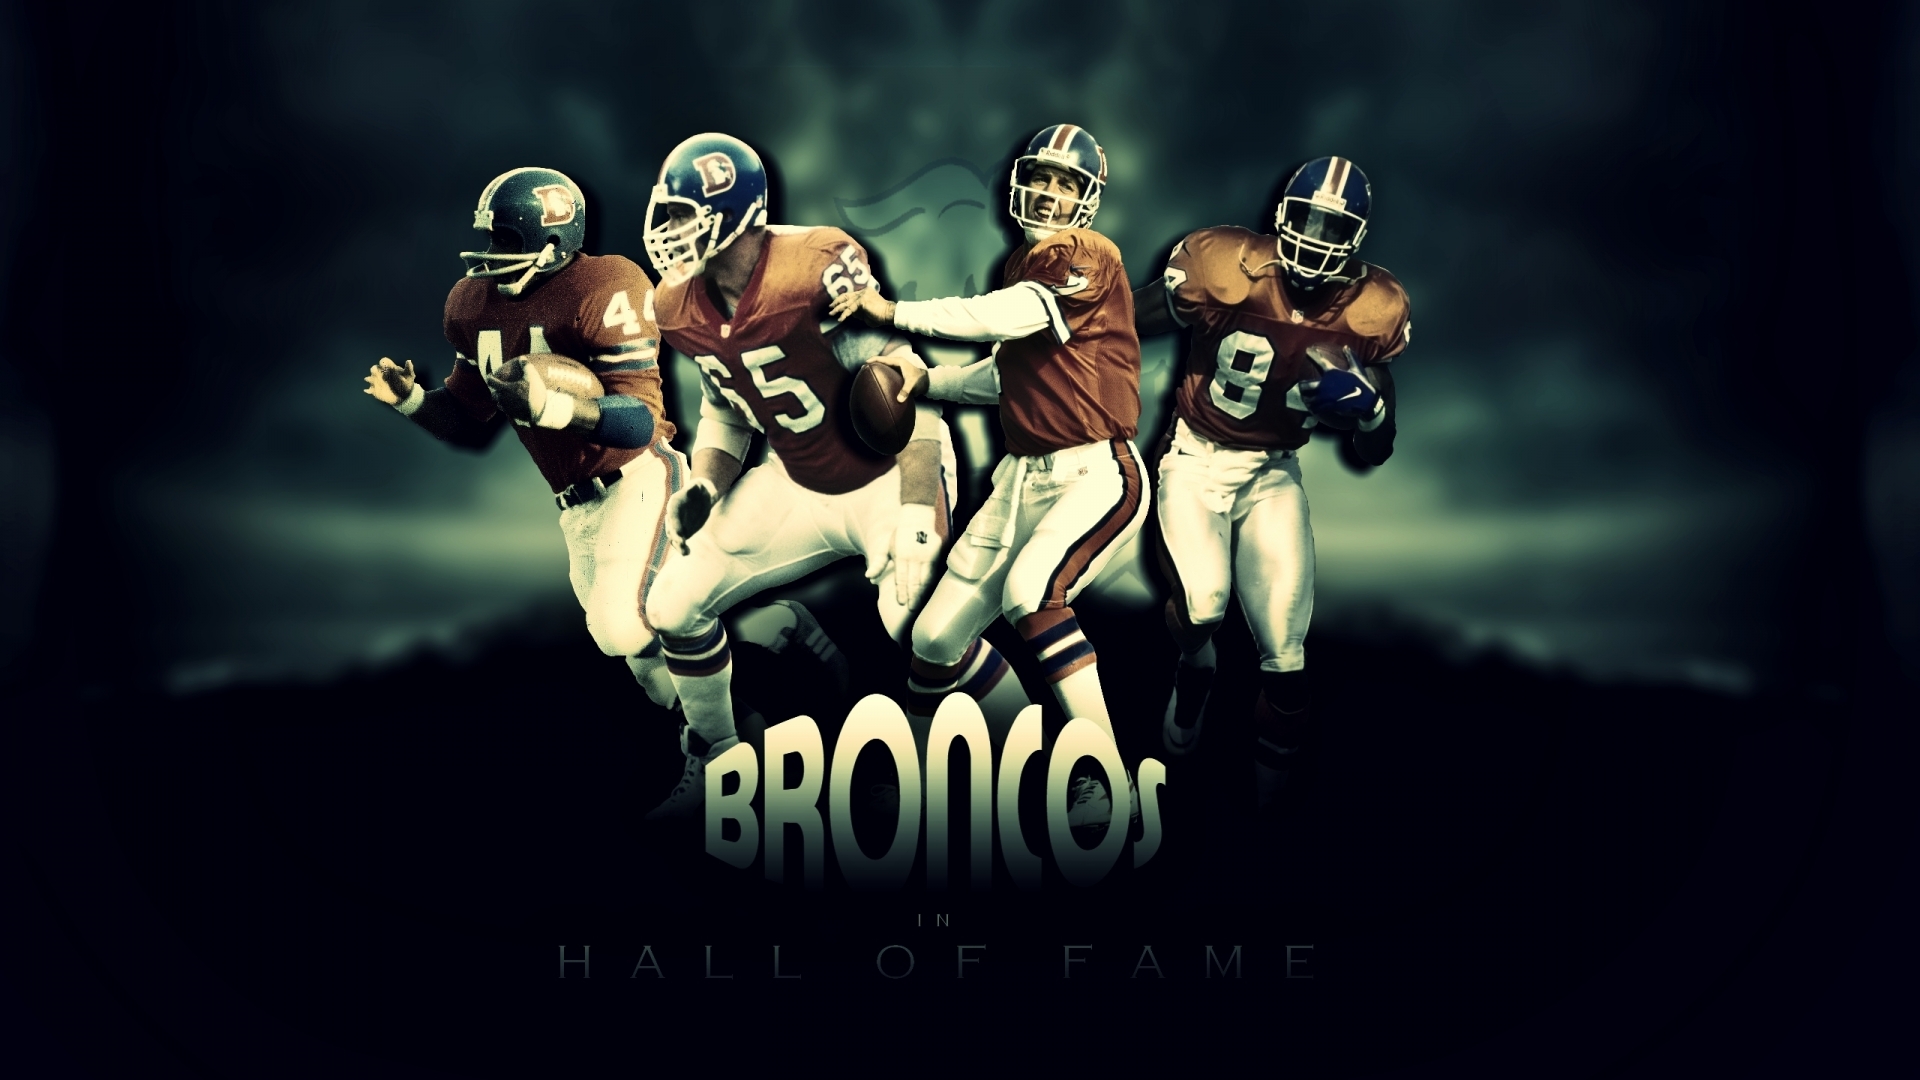 Broncos Hall of Fame for 1920 x 1080 HDTV 1080p resolution